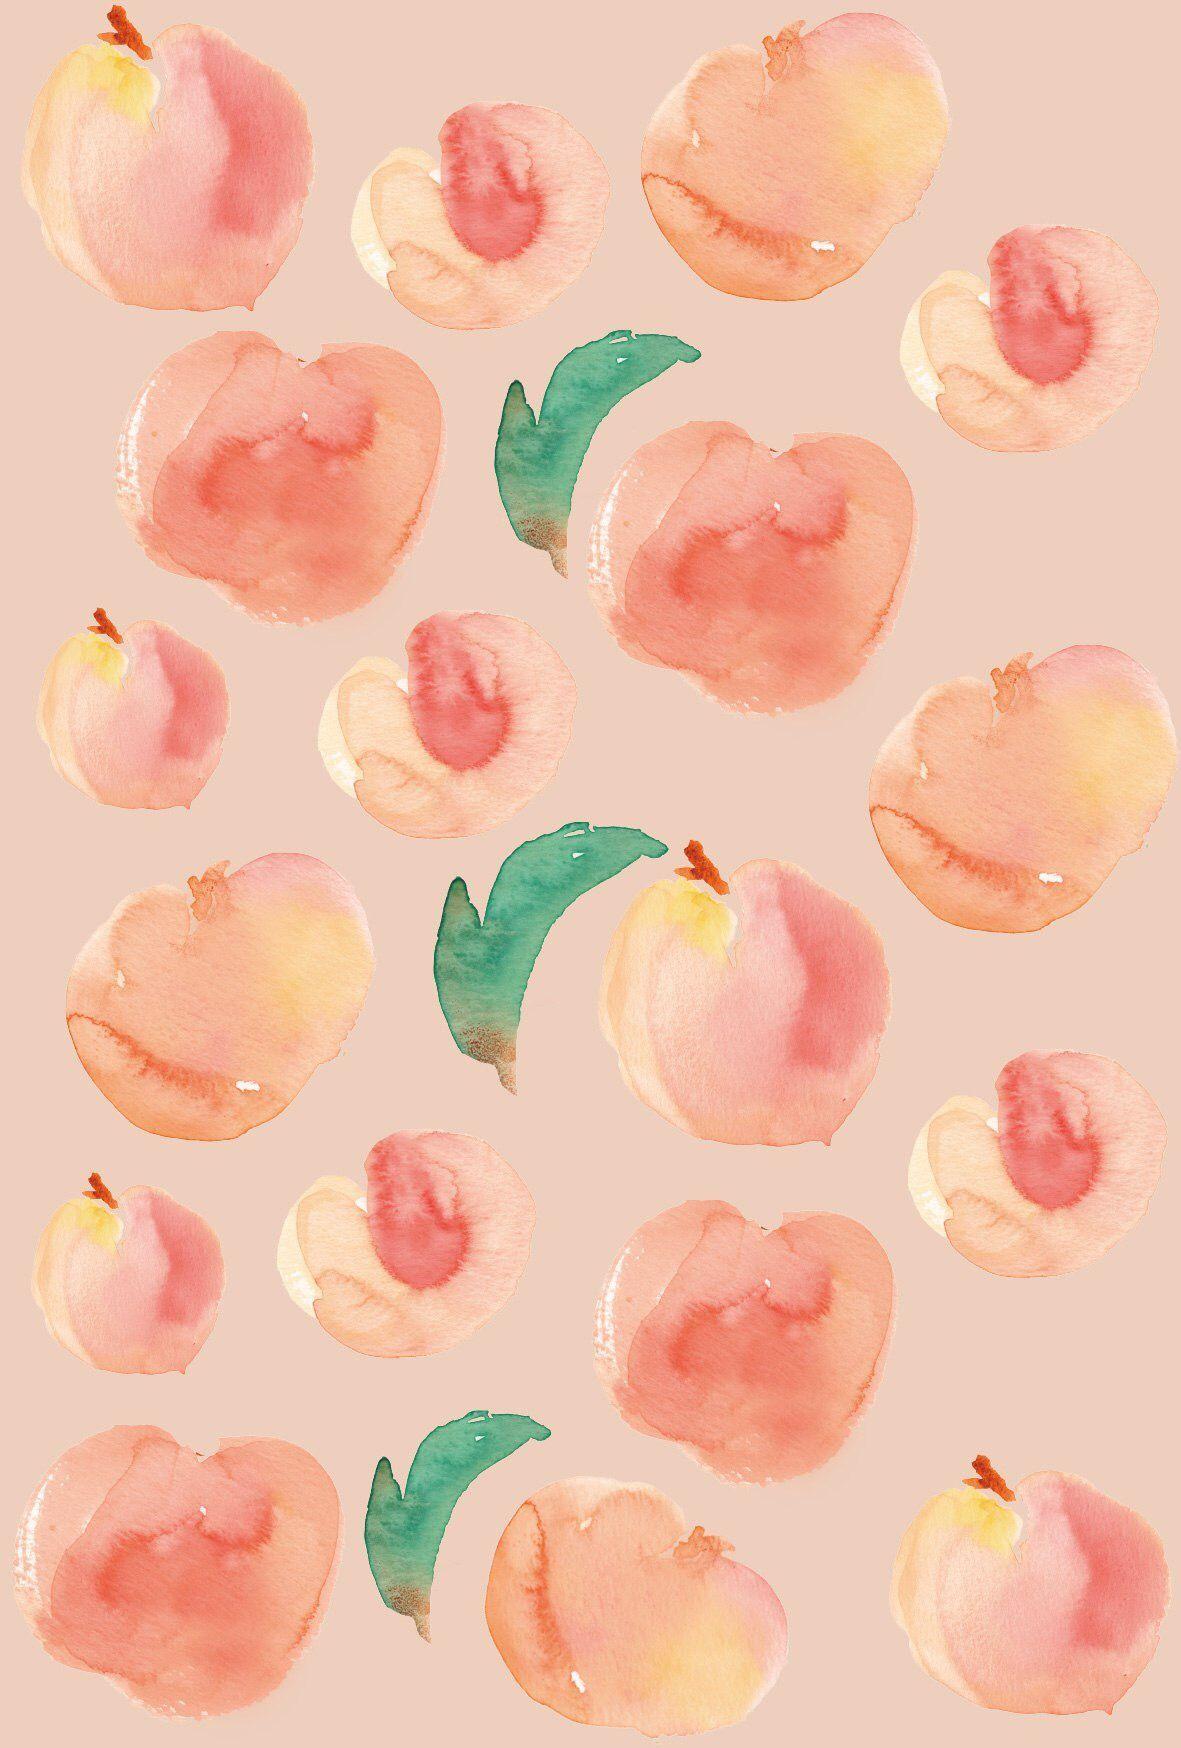 Peach Aesthetic Wallpapers - Wallpaper Cave